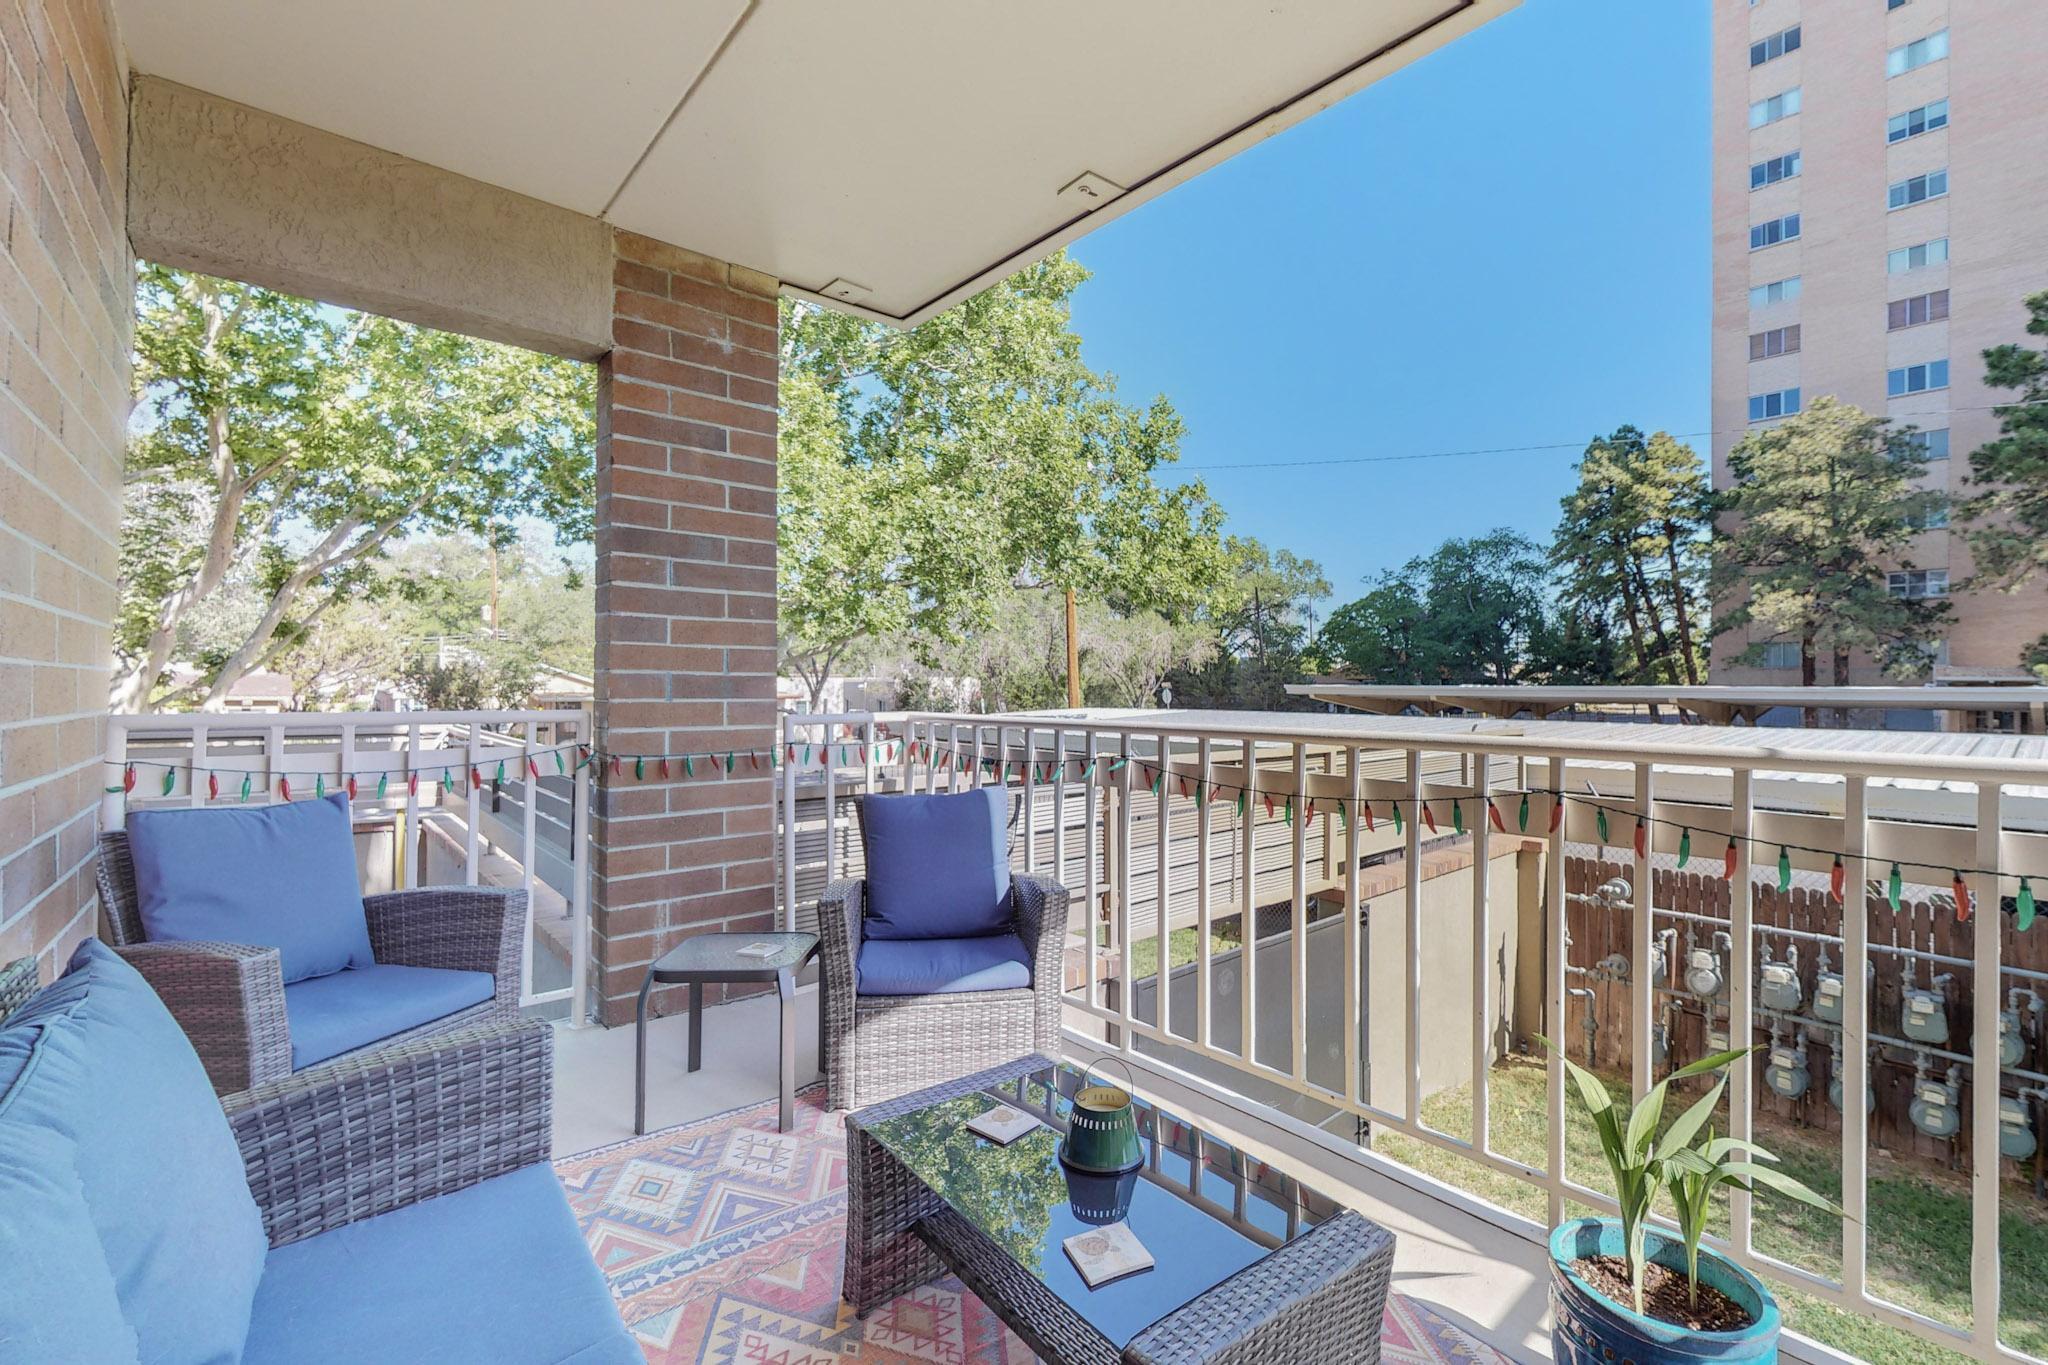 Cozy, Fully Remodeled 2 BR Condo w/ Fireplace & Balcony w/peek-a-boo Mtn view.  Close proximity to dntn growers market, zoo, restaurants, old town and more! This condo was fully renovated in 2023: tankless Water heater, HVAC dual heat/ac recently replaced. Bath/Kitchen fully remodeled. jet tub.Replaced 2 balc doors & added 3, dbl pane storm doors$11,474. New windows $6,445, New kitchen backsplash $3,774, under cabinet lighting, quartz Cntr tops, stacked w/d $2,630. kitchen appliances replaced 2023. Cove ceilings, Steel door added to storage room$912 (in garage). Insulation added. community BBQ grill, Dog park, fruit trees: cherry, peach, apple, pomegranate. All appliances convey, wine fridge. Has storage unit & 2 covered garage spaces.